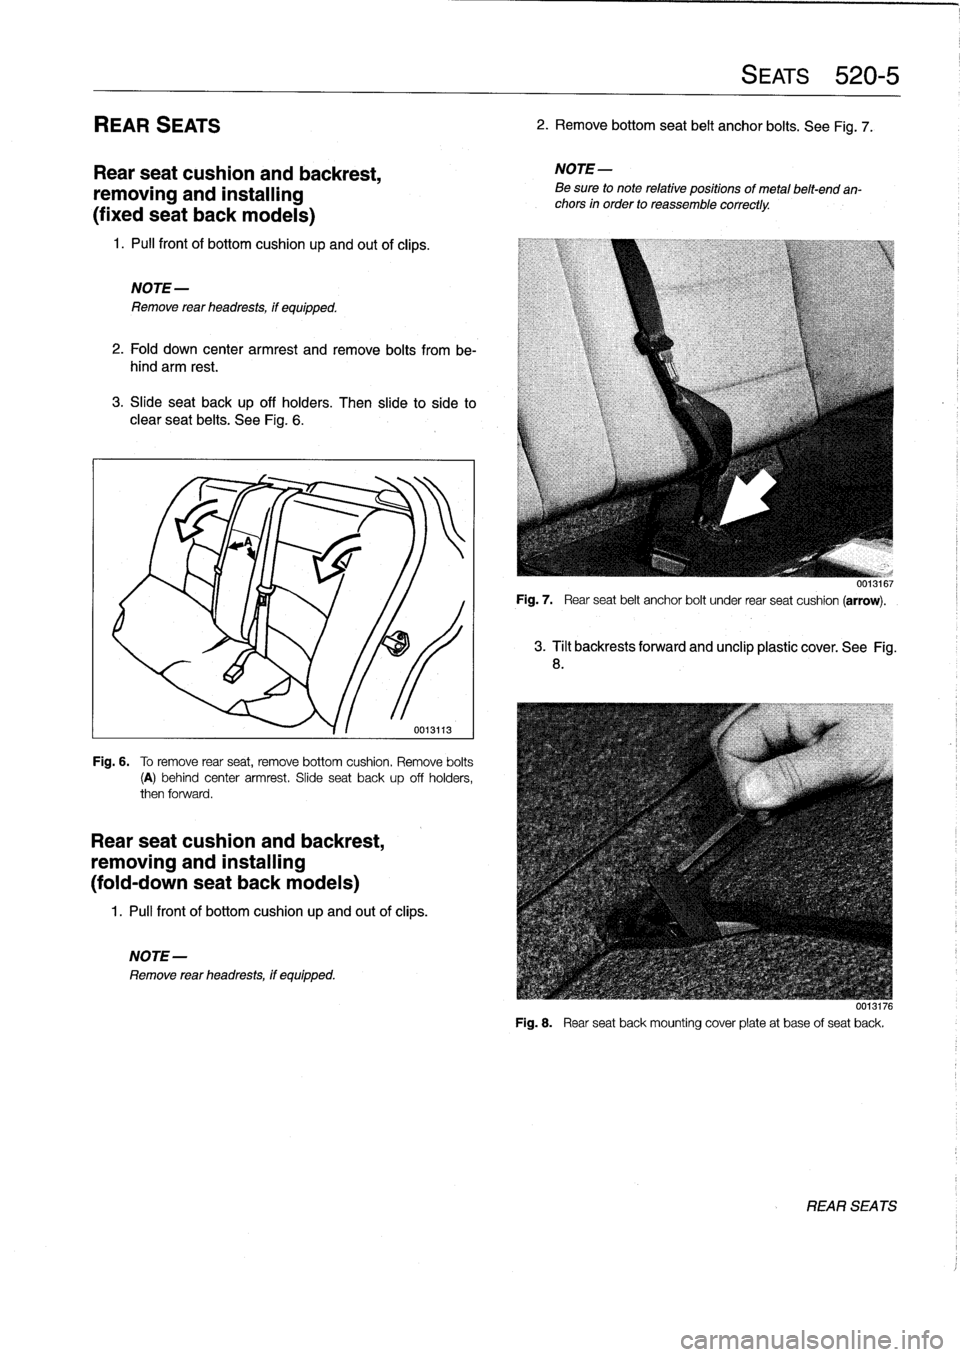 BMW 328i 1994 E36 Workshop Manual 
REAR
SEATS

Rear
seat
cushion
and
backrest,

removing
and
installing

(fixed
seat
back
modeis)

1
.
Pull
front
of
bottomcushion
up
and
out
of
clips
.

NOTE-

Remove
rear
headrests,
if
equipped
.

2
.